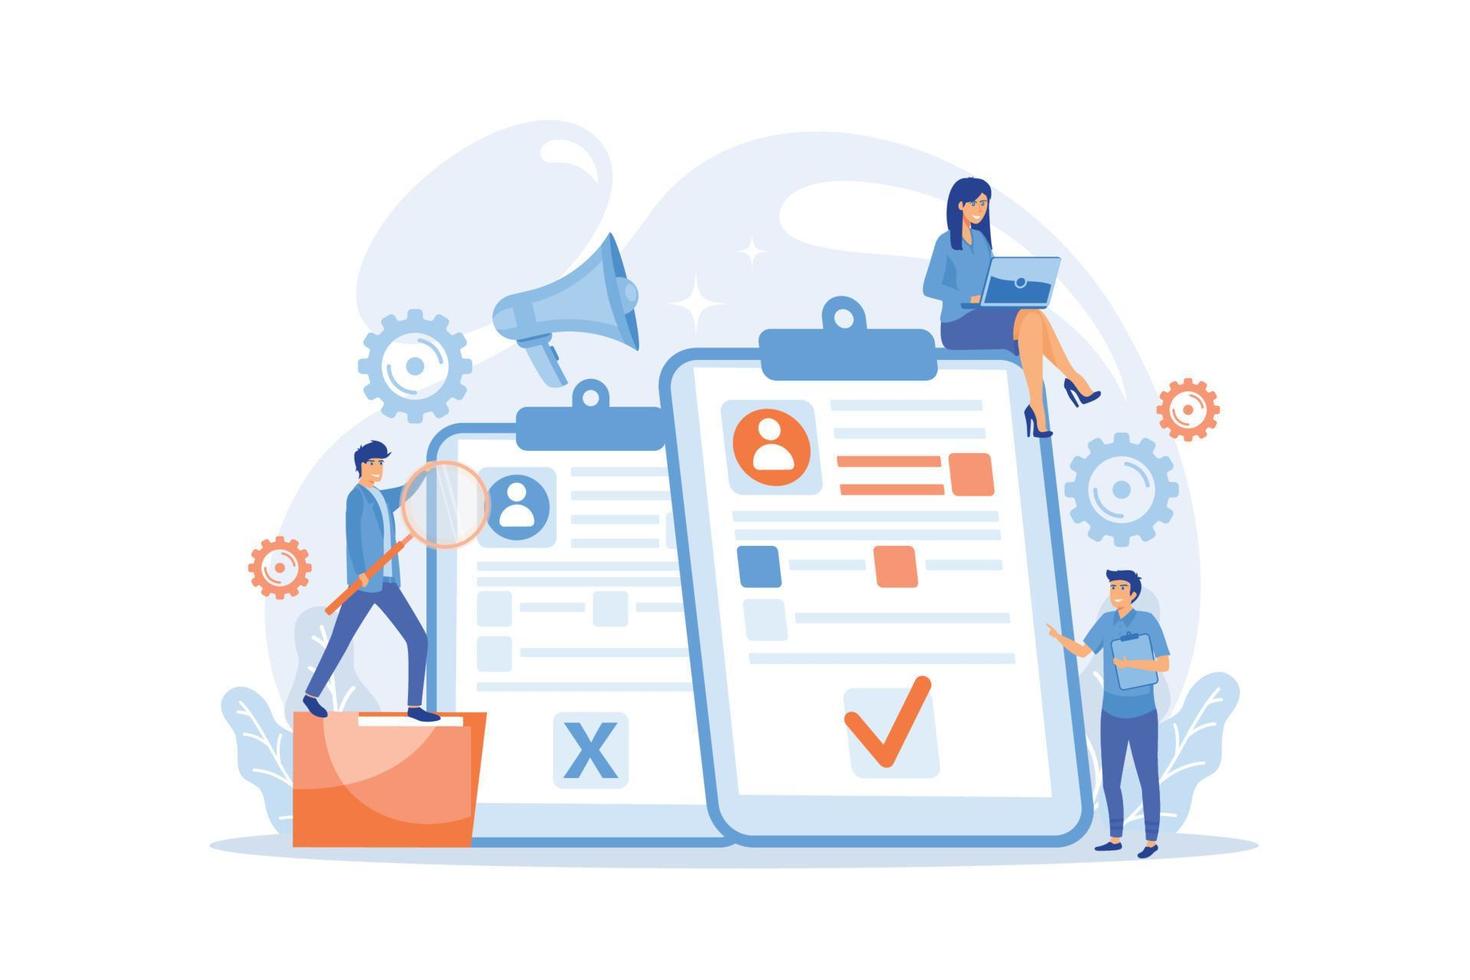 Company hr managers hiring a new employee using resume, magnifier and megaphone. Hiring employee, filling out resume, hiring process concept.flat vector modern illustration